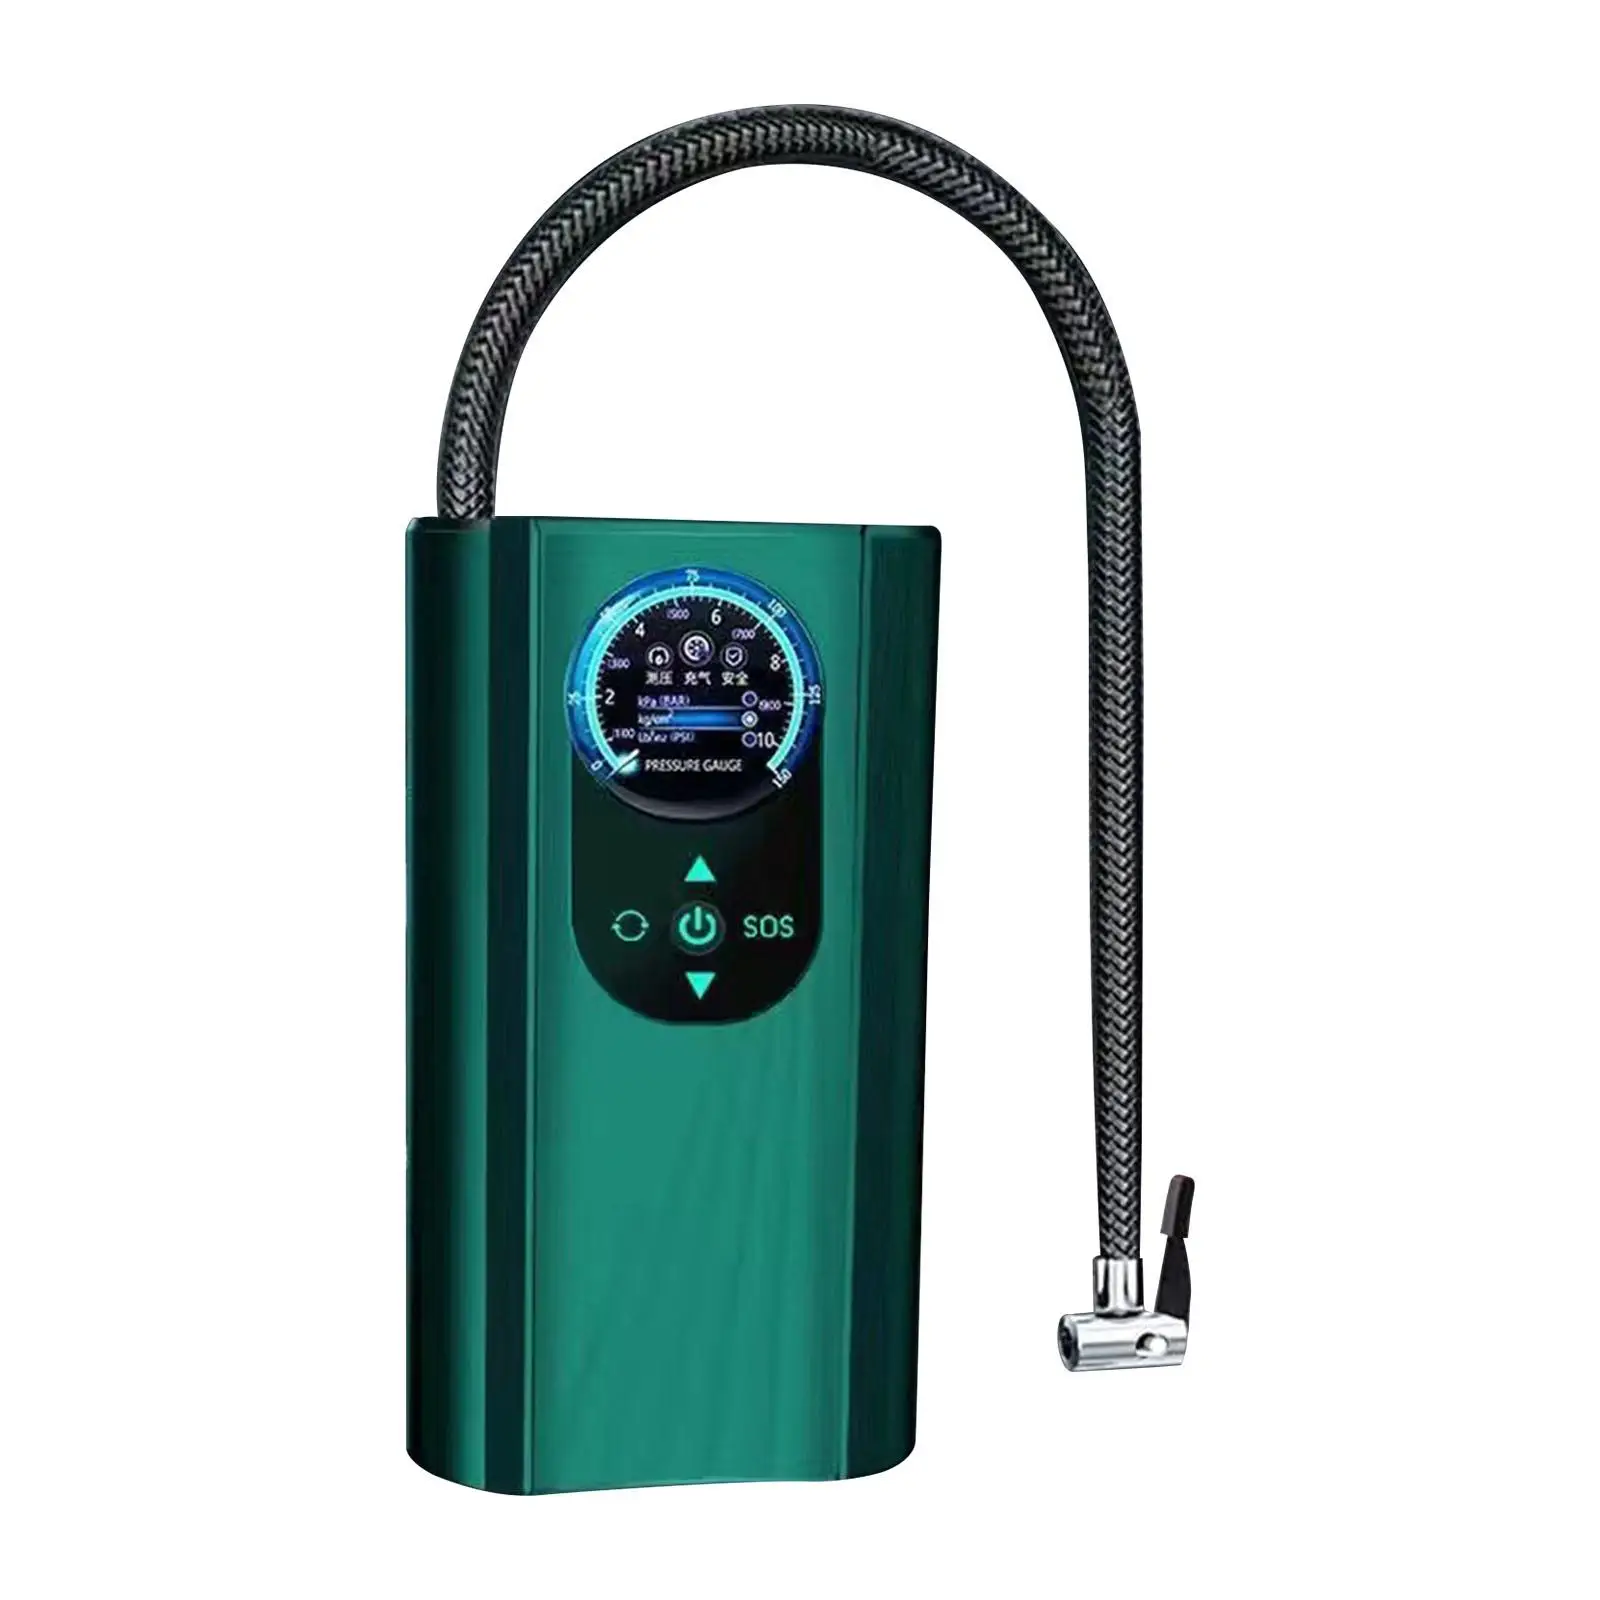 Portable Air Compressor Handheld Electric Tire Pump for Bicycle Car SUV